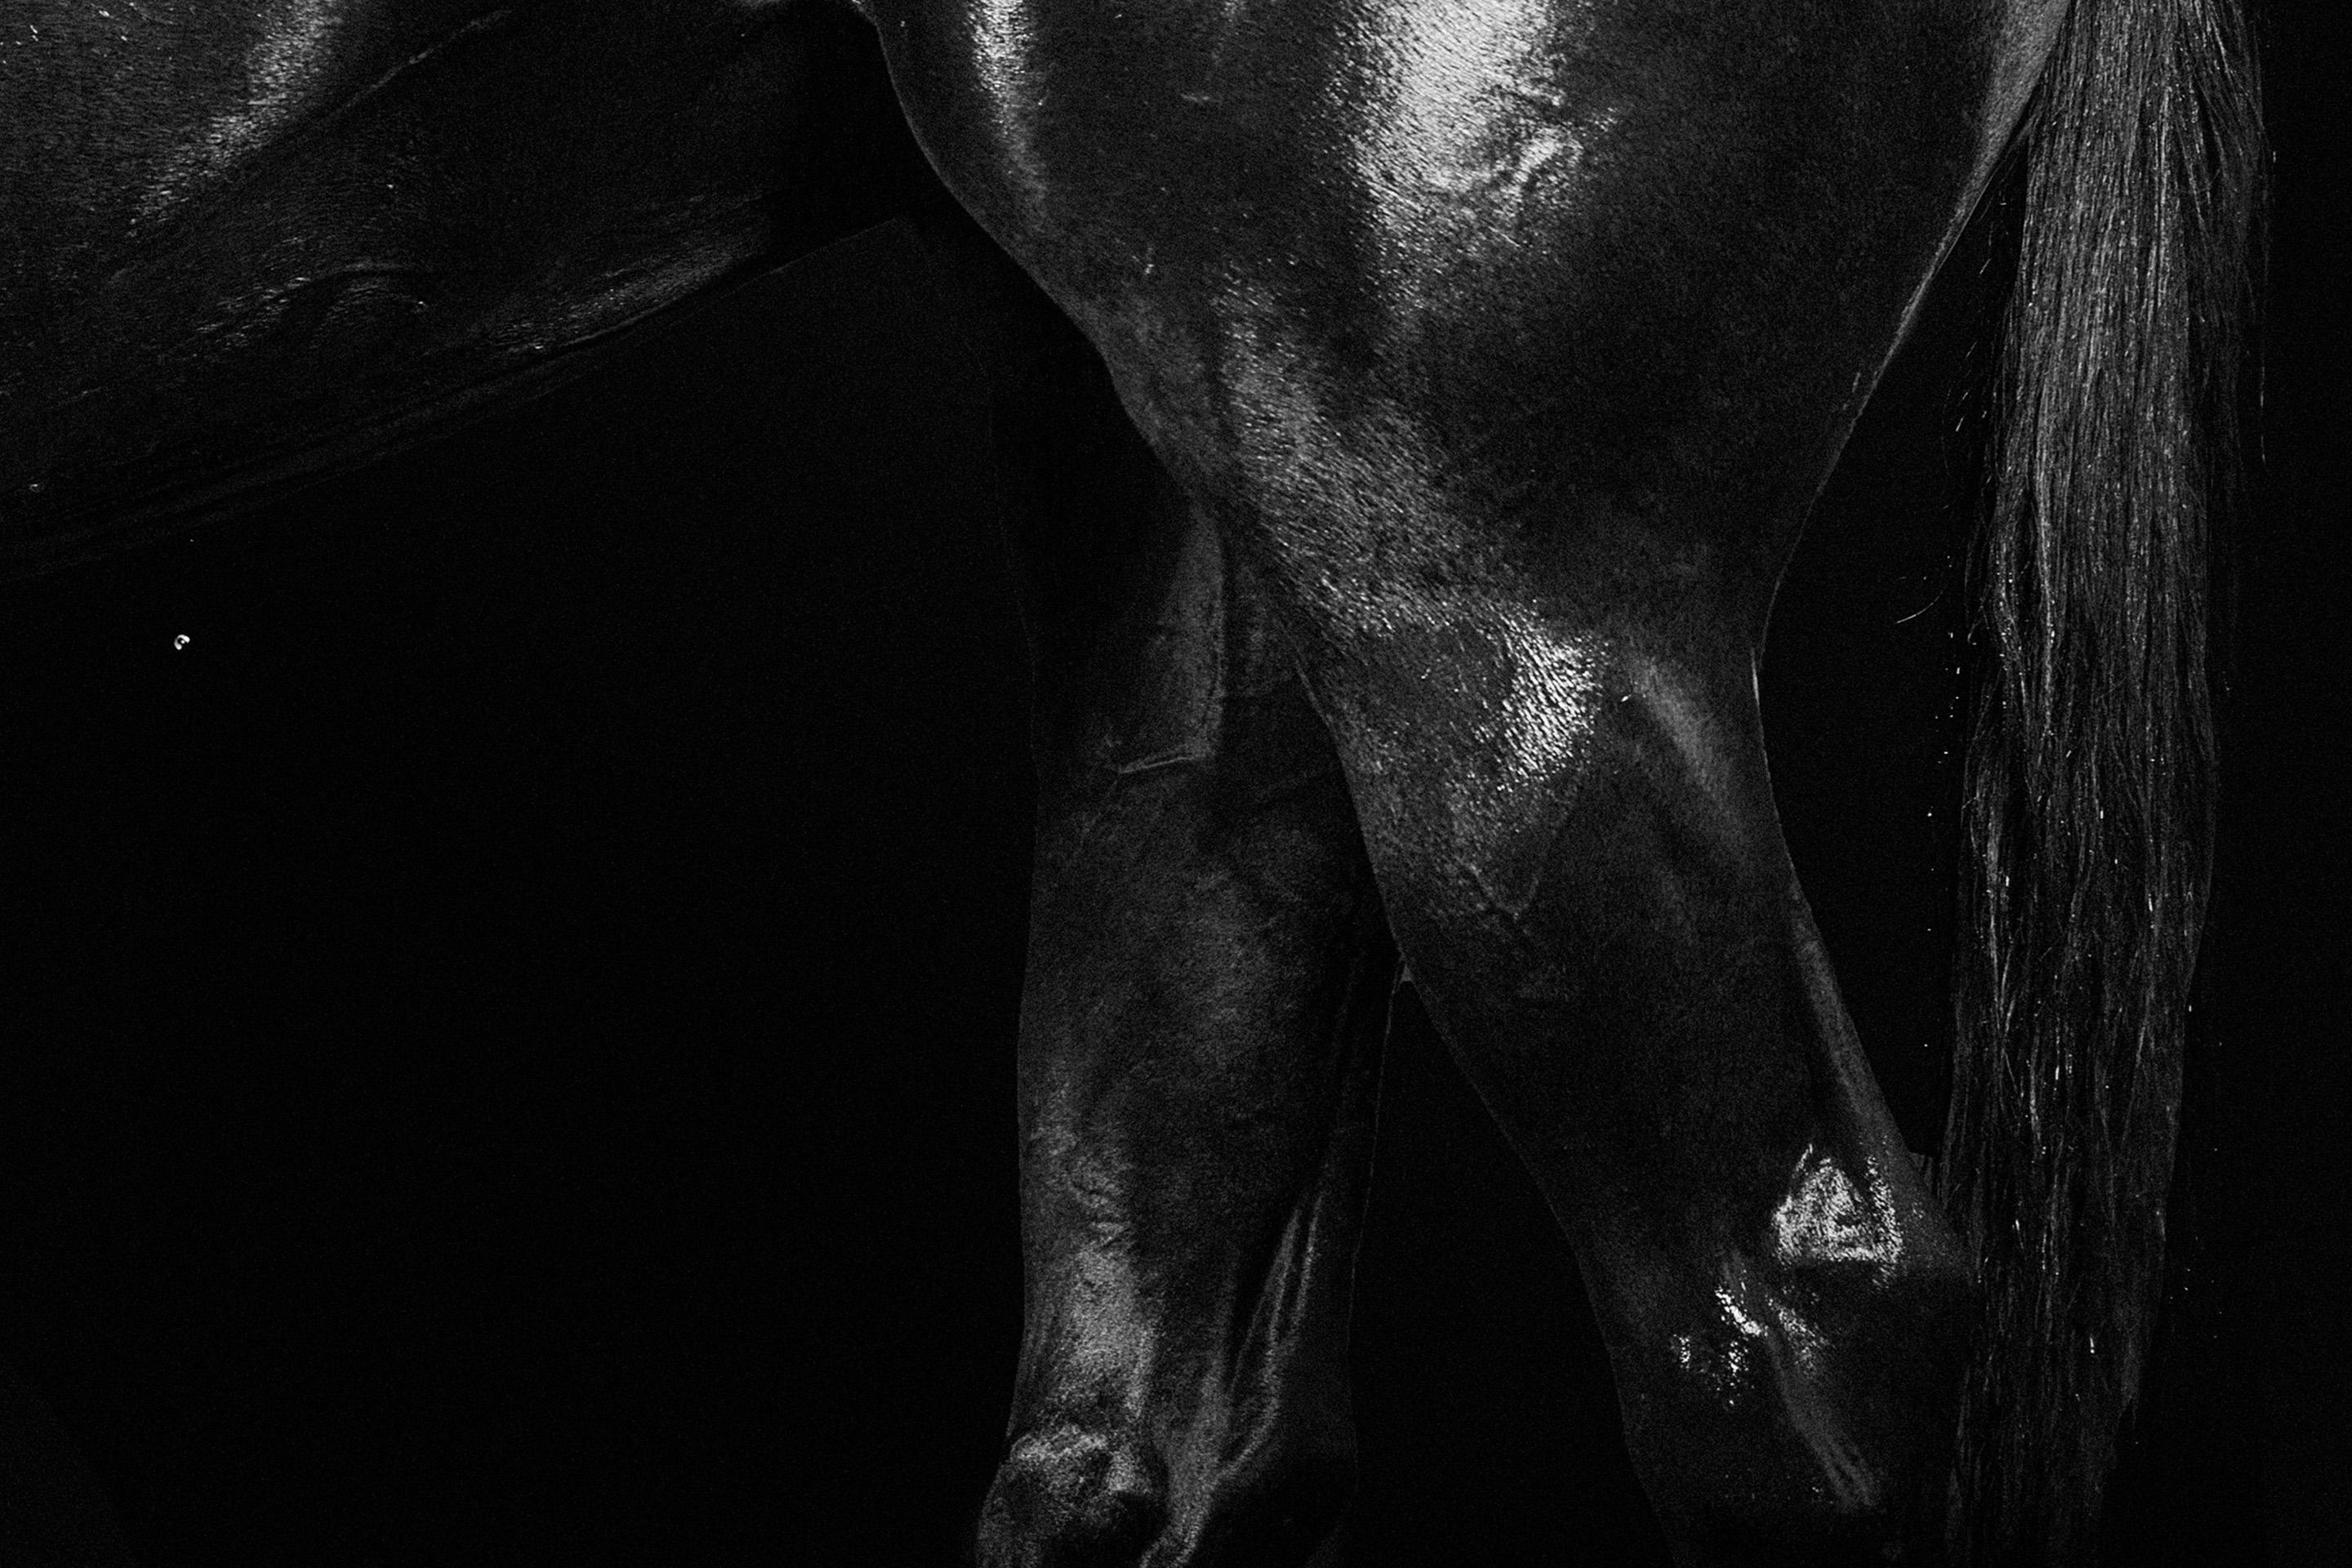 Rusa I, 2015 by Juan Lamarca
Fine art metallic paper
Image size: 30 x 40 inches
Edition 2 of 10 plus 2 AP
Unframed

Juan Lamarca's Horse Series, is an abstract collection of photographs featuring high performance horses. The images seek to capture